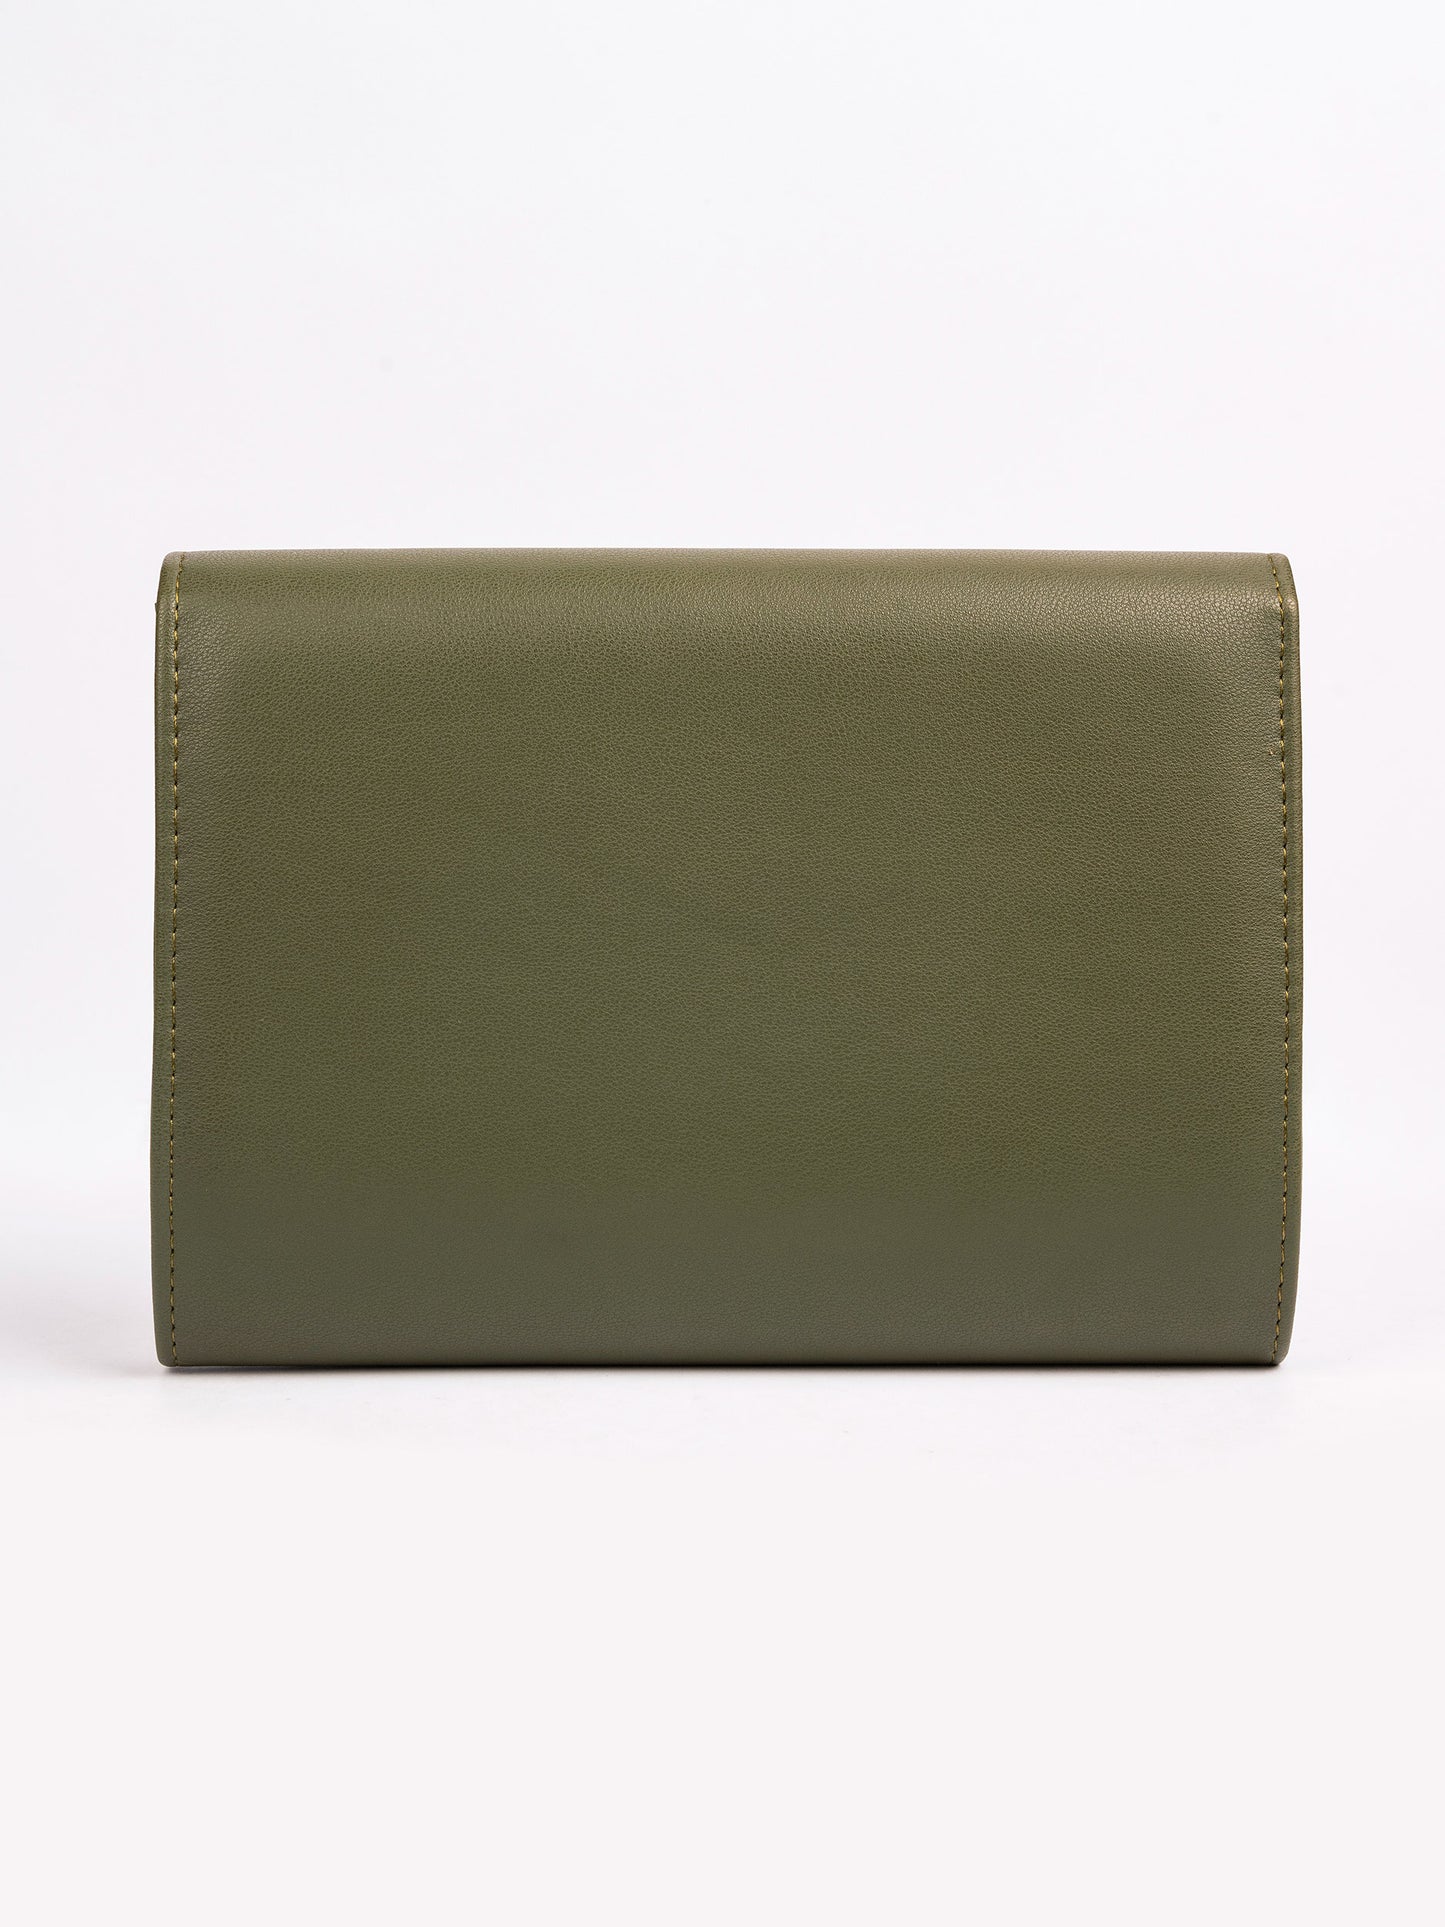 Two Toned Envelope Clutch